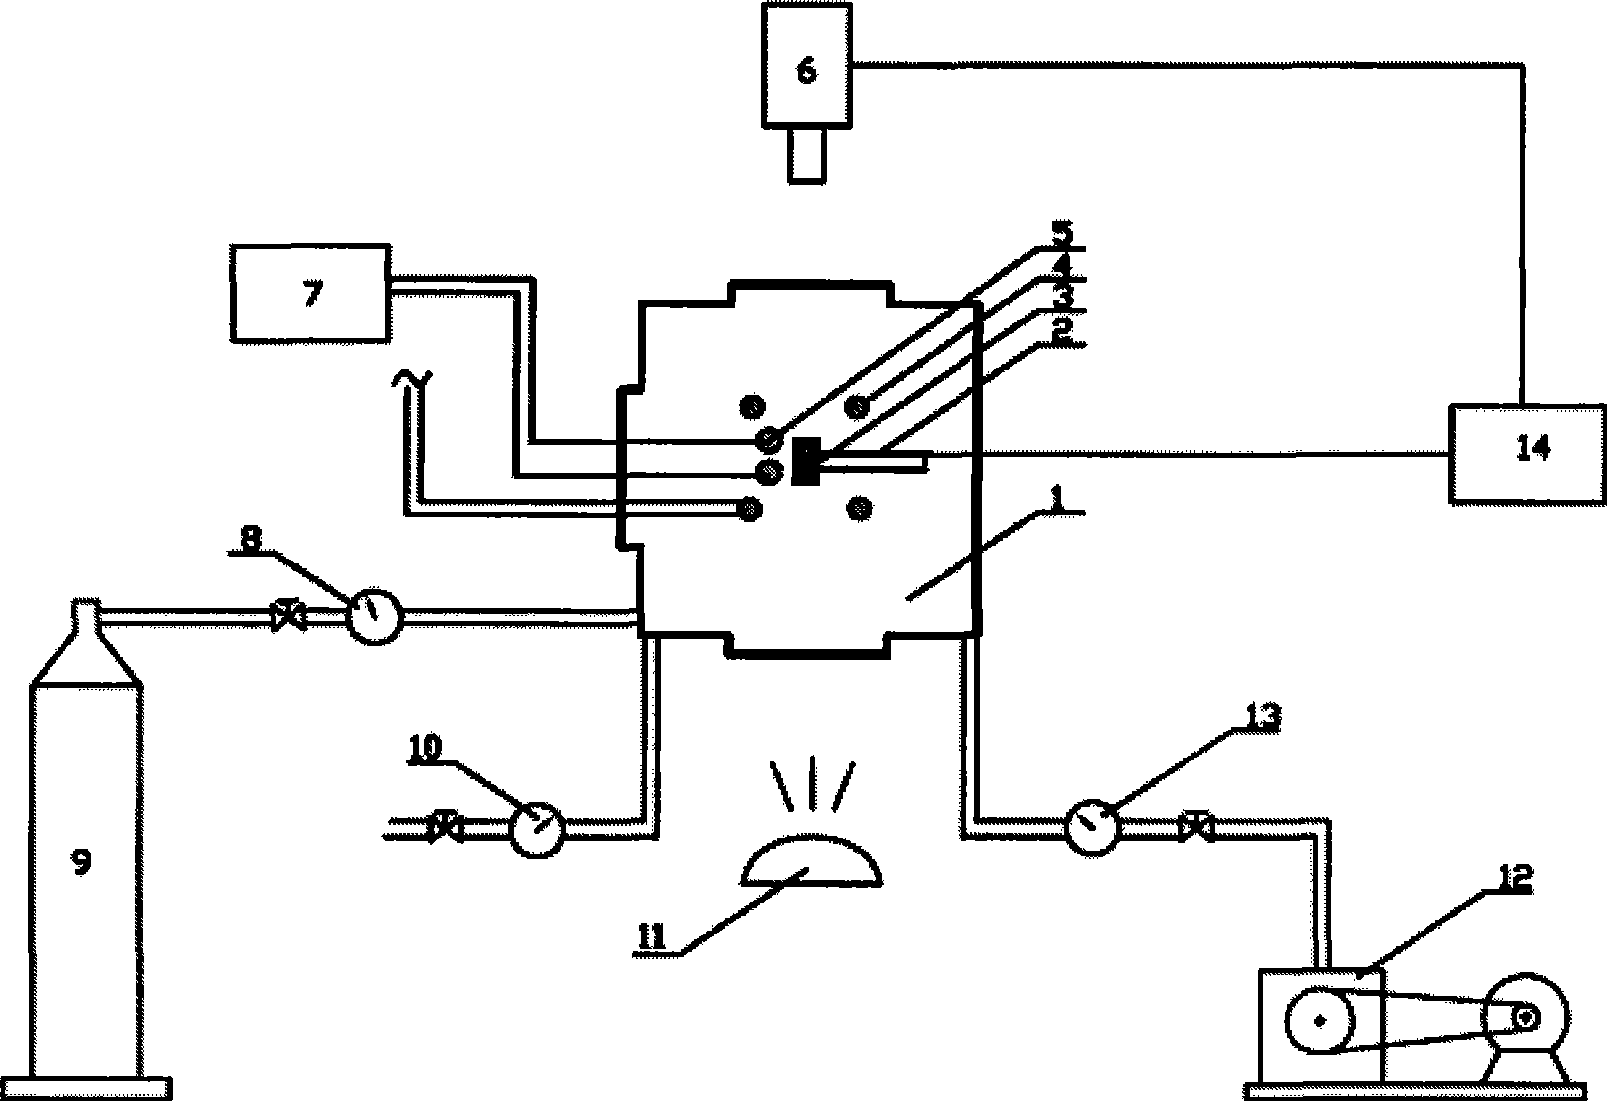 Device for testing powder combustion characteristics in vacuum condition